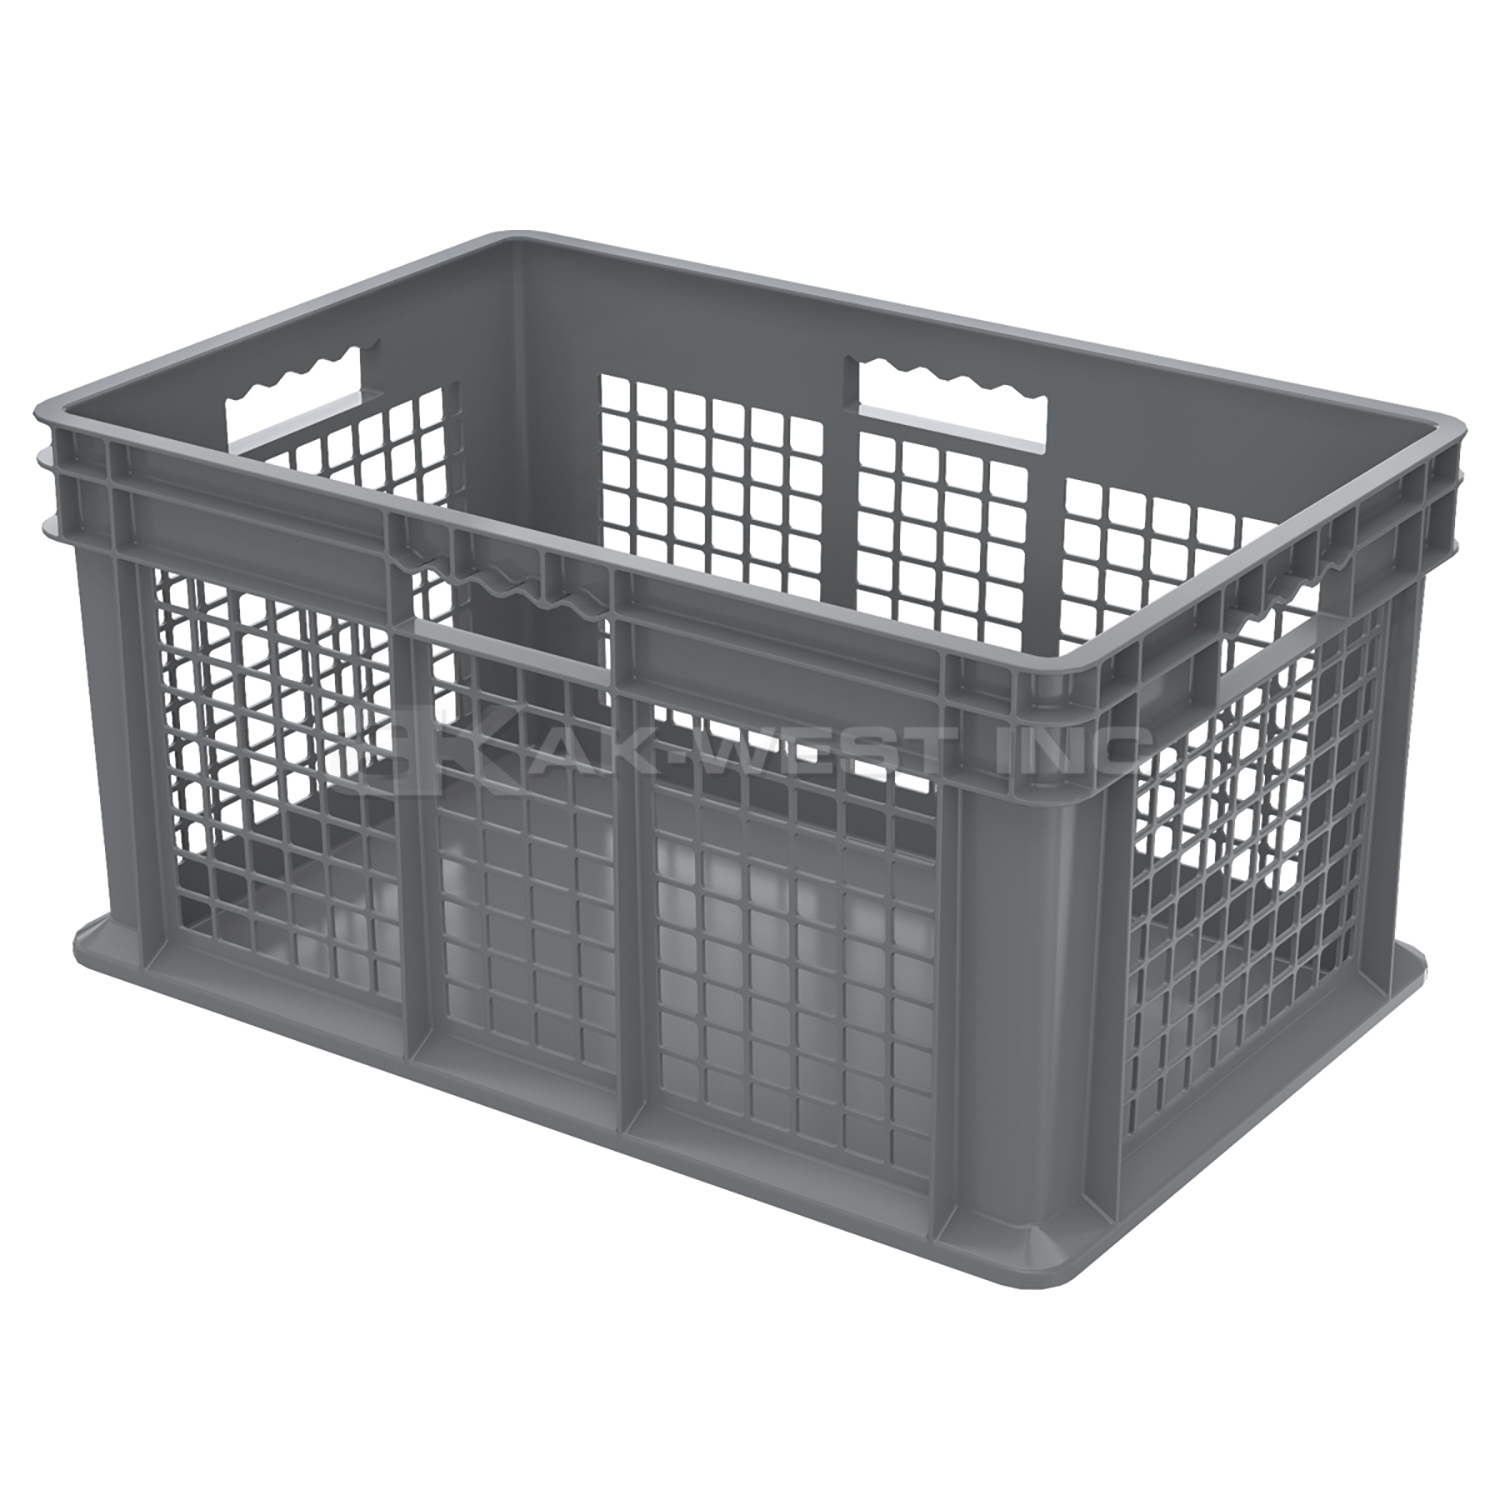 Grey, 23-3/4" x 15-3/4" x 12-1/4", Vented Side/Solid Base, Straight Wall Container (3 Per Carton)